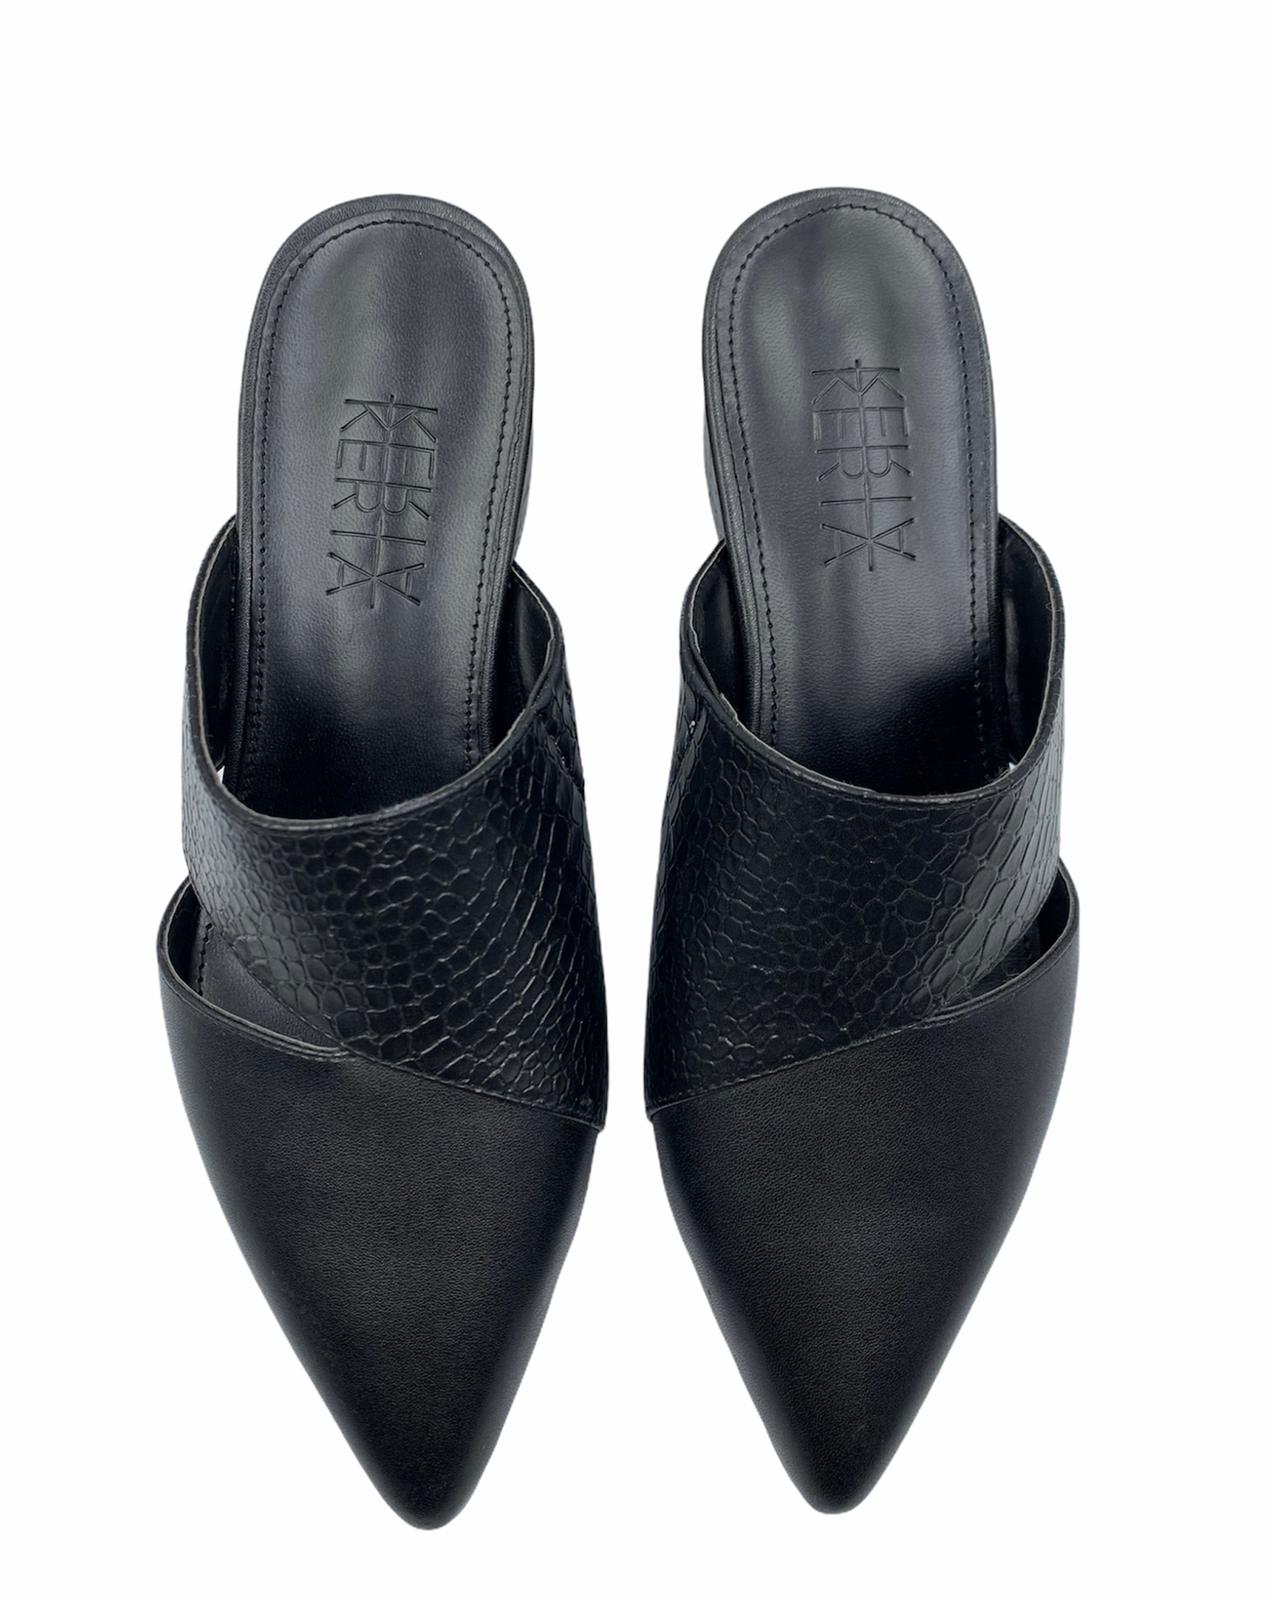 Half Black Snakeskin Leather Shoes with Cut Out effect